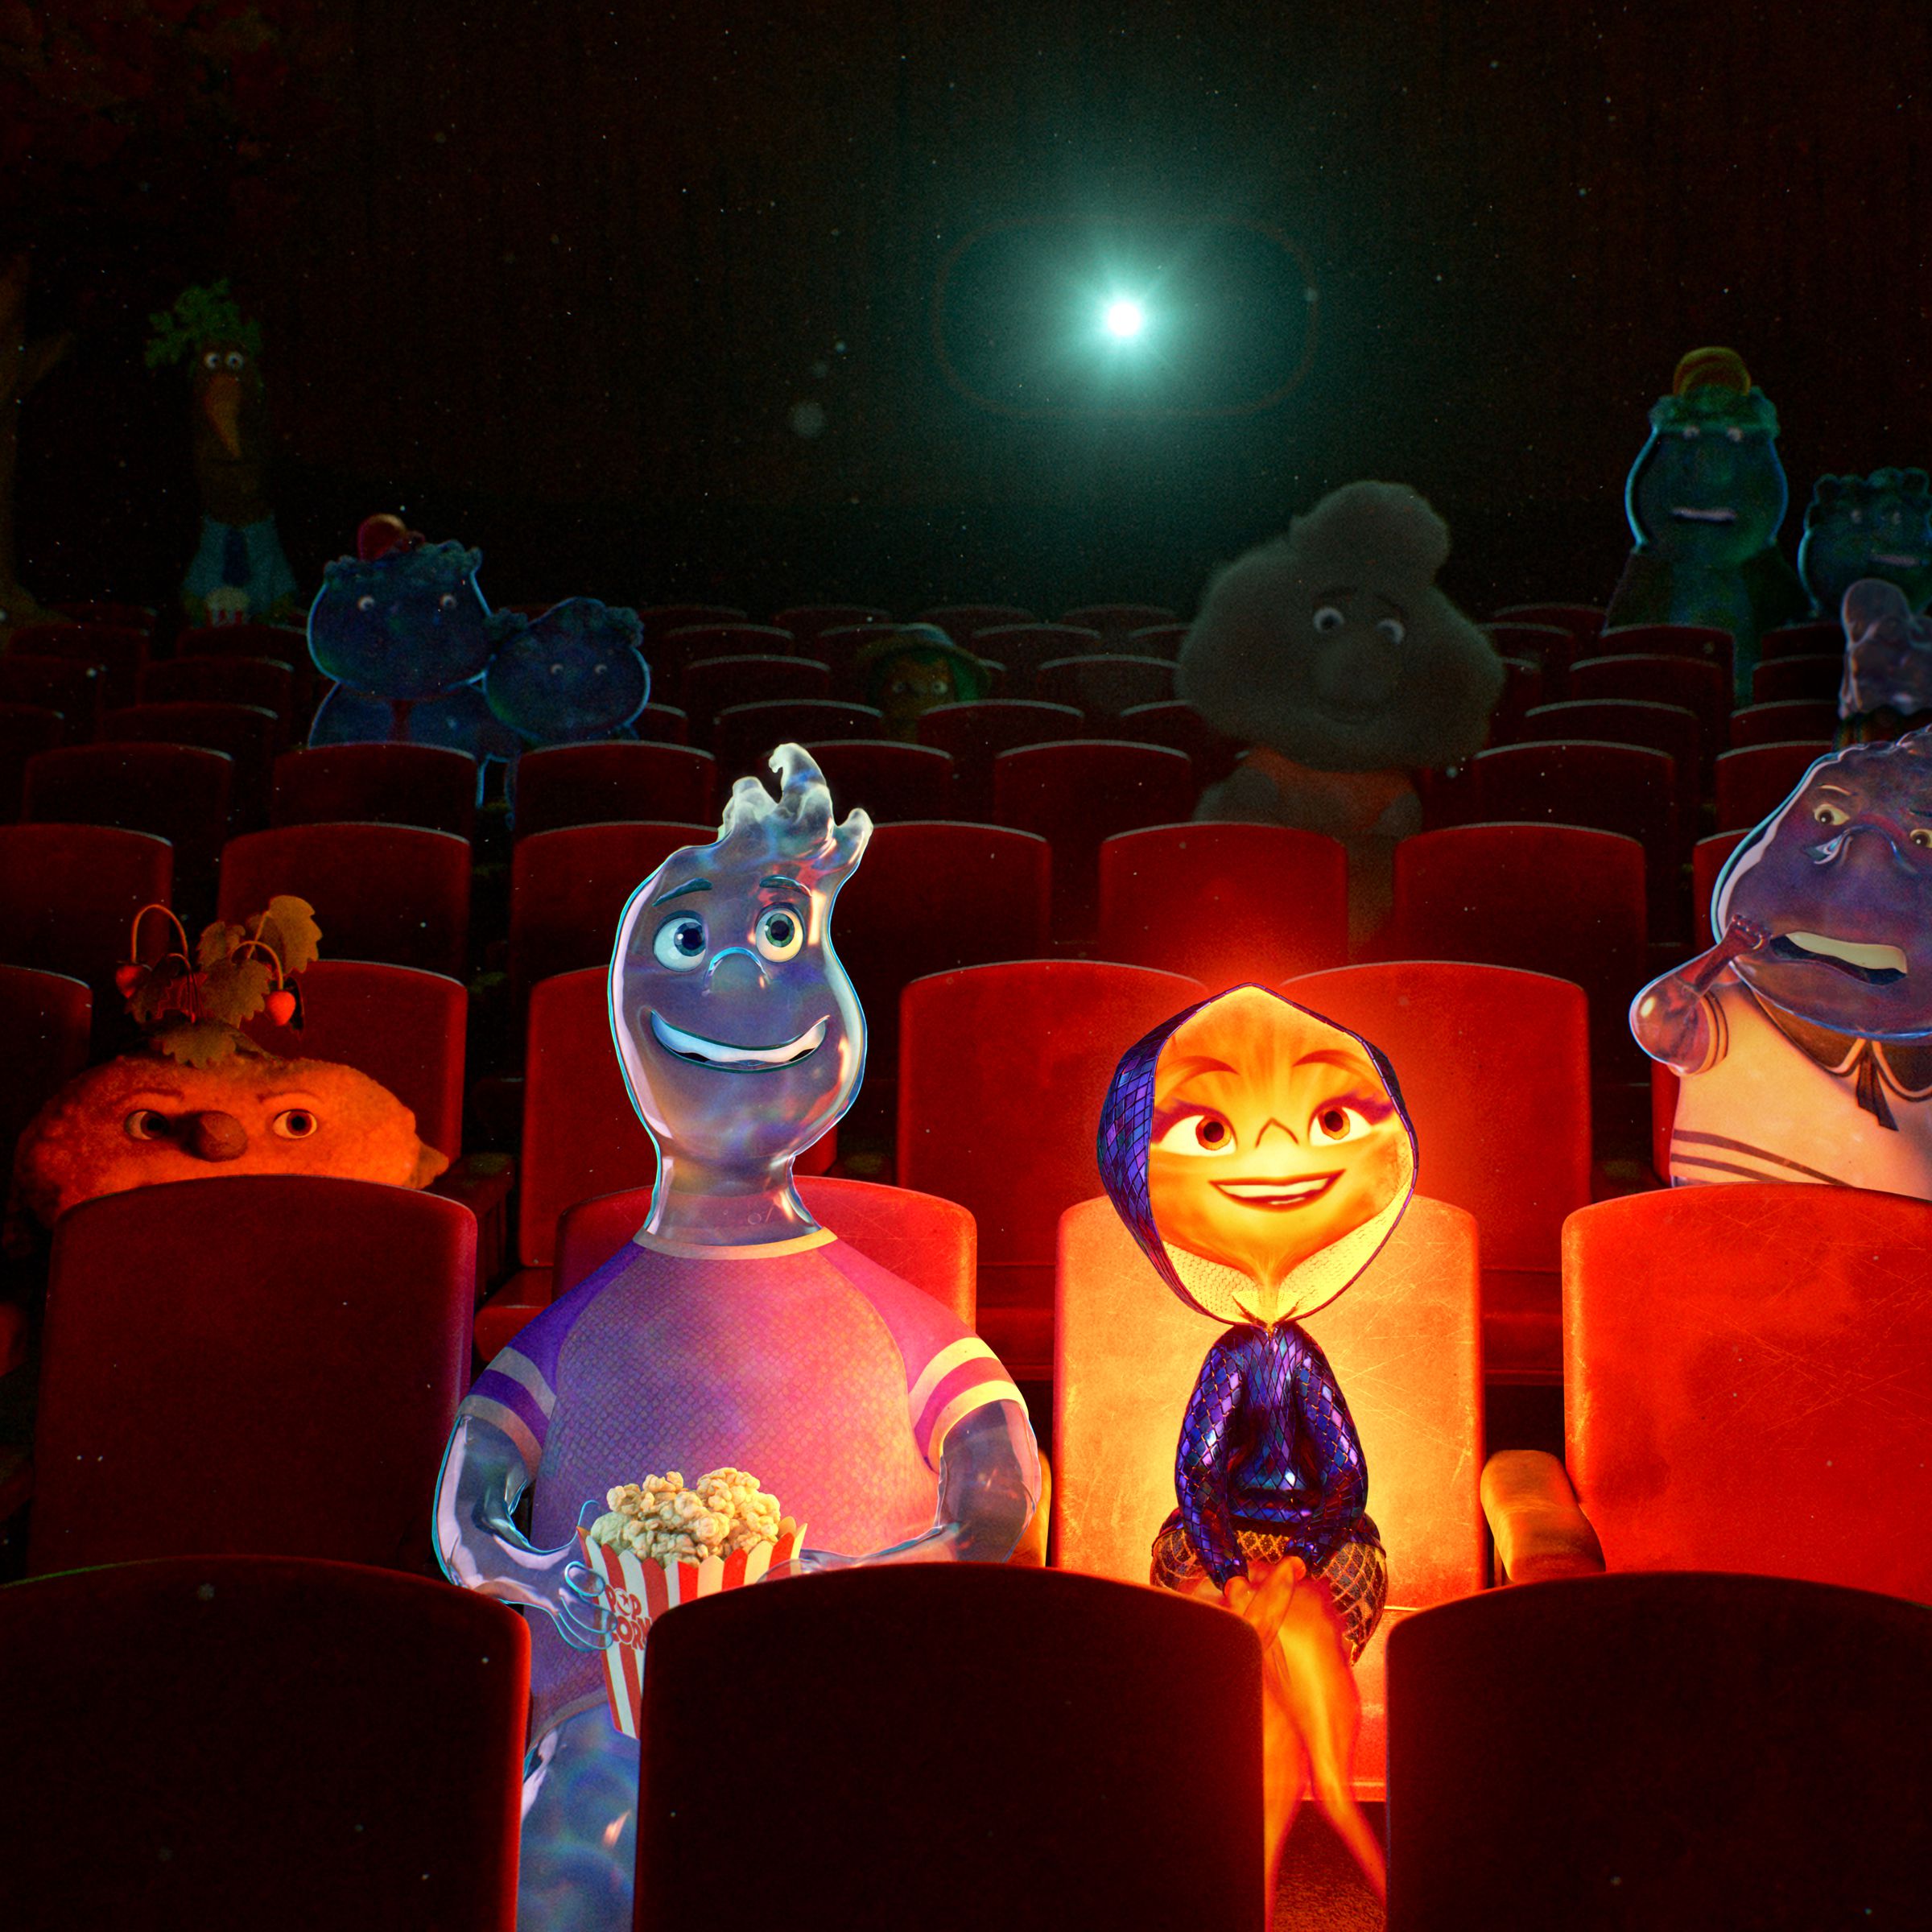 A humanoid man made entirely of water sitting next to a humanoid woman made of flames. The pair are seated next to one another in a dark movie theater illuminated only by the light shining from a projector in the distant background and from the light emanating from the woman’s body.